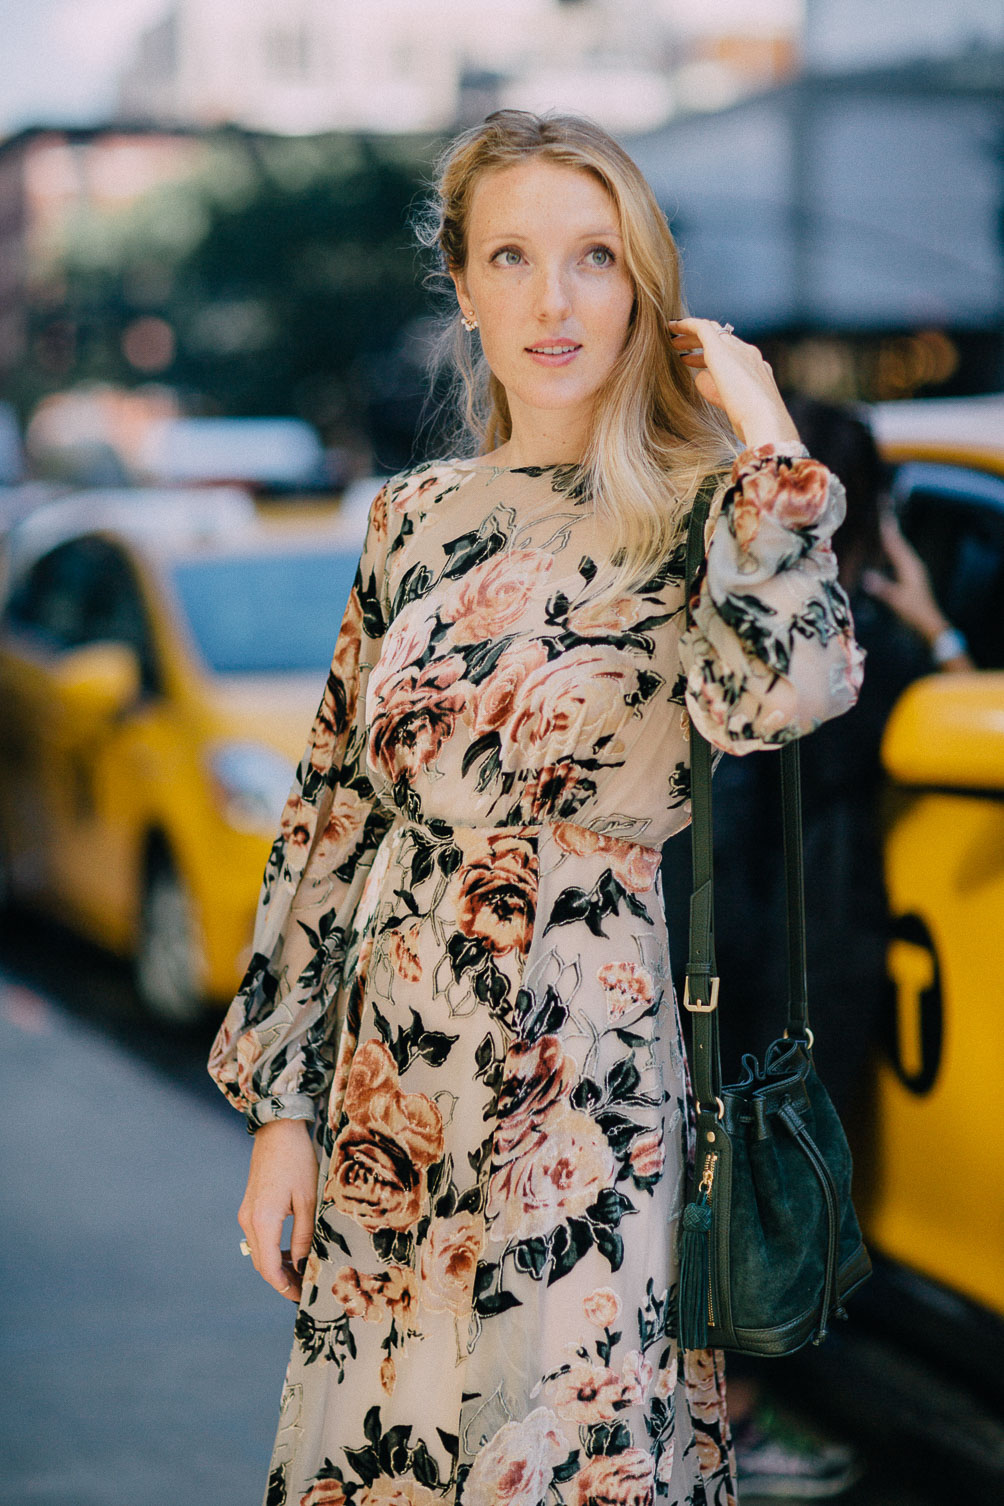 Leslie Musser SS17 NYFW street style outfit in BHLDN floral velvet gown on one brass fox